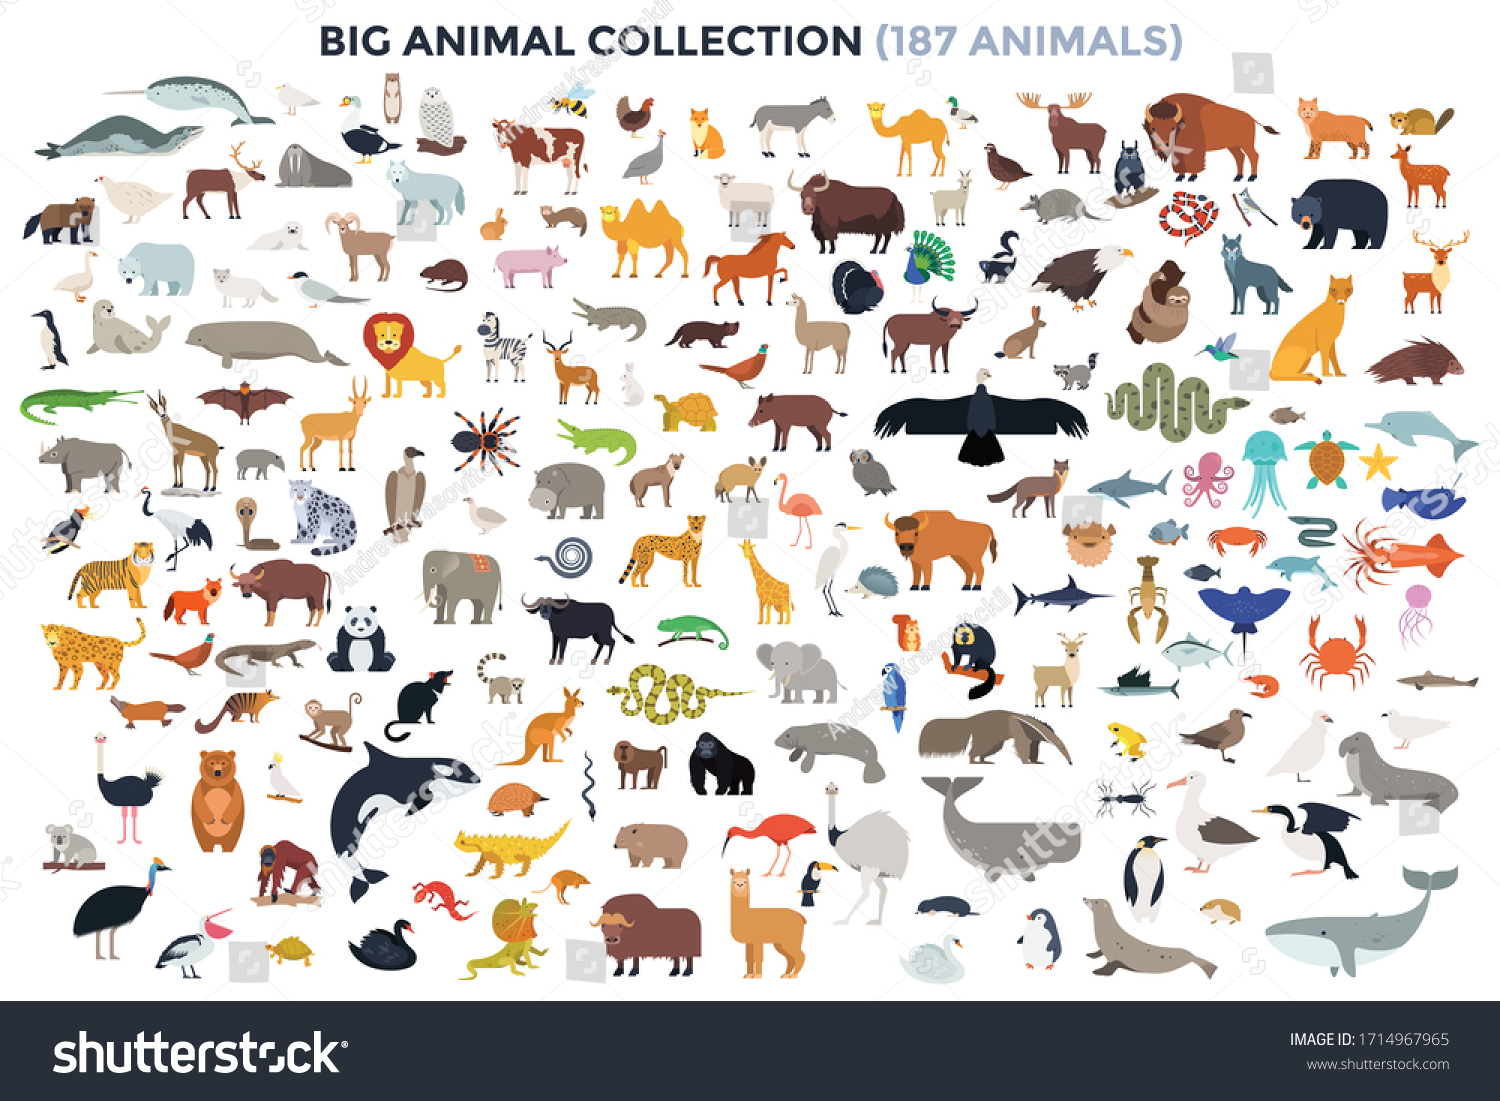 SVG of Big bundle of funny domestic and wild animals, marine mammals, reptiles, birds and fish. Collection of cute cartoon characters isolated on white background. Colorful vector illustration in flat style. svg